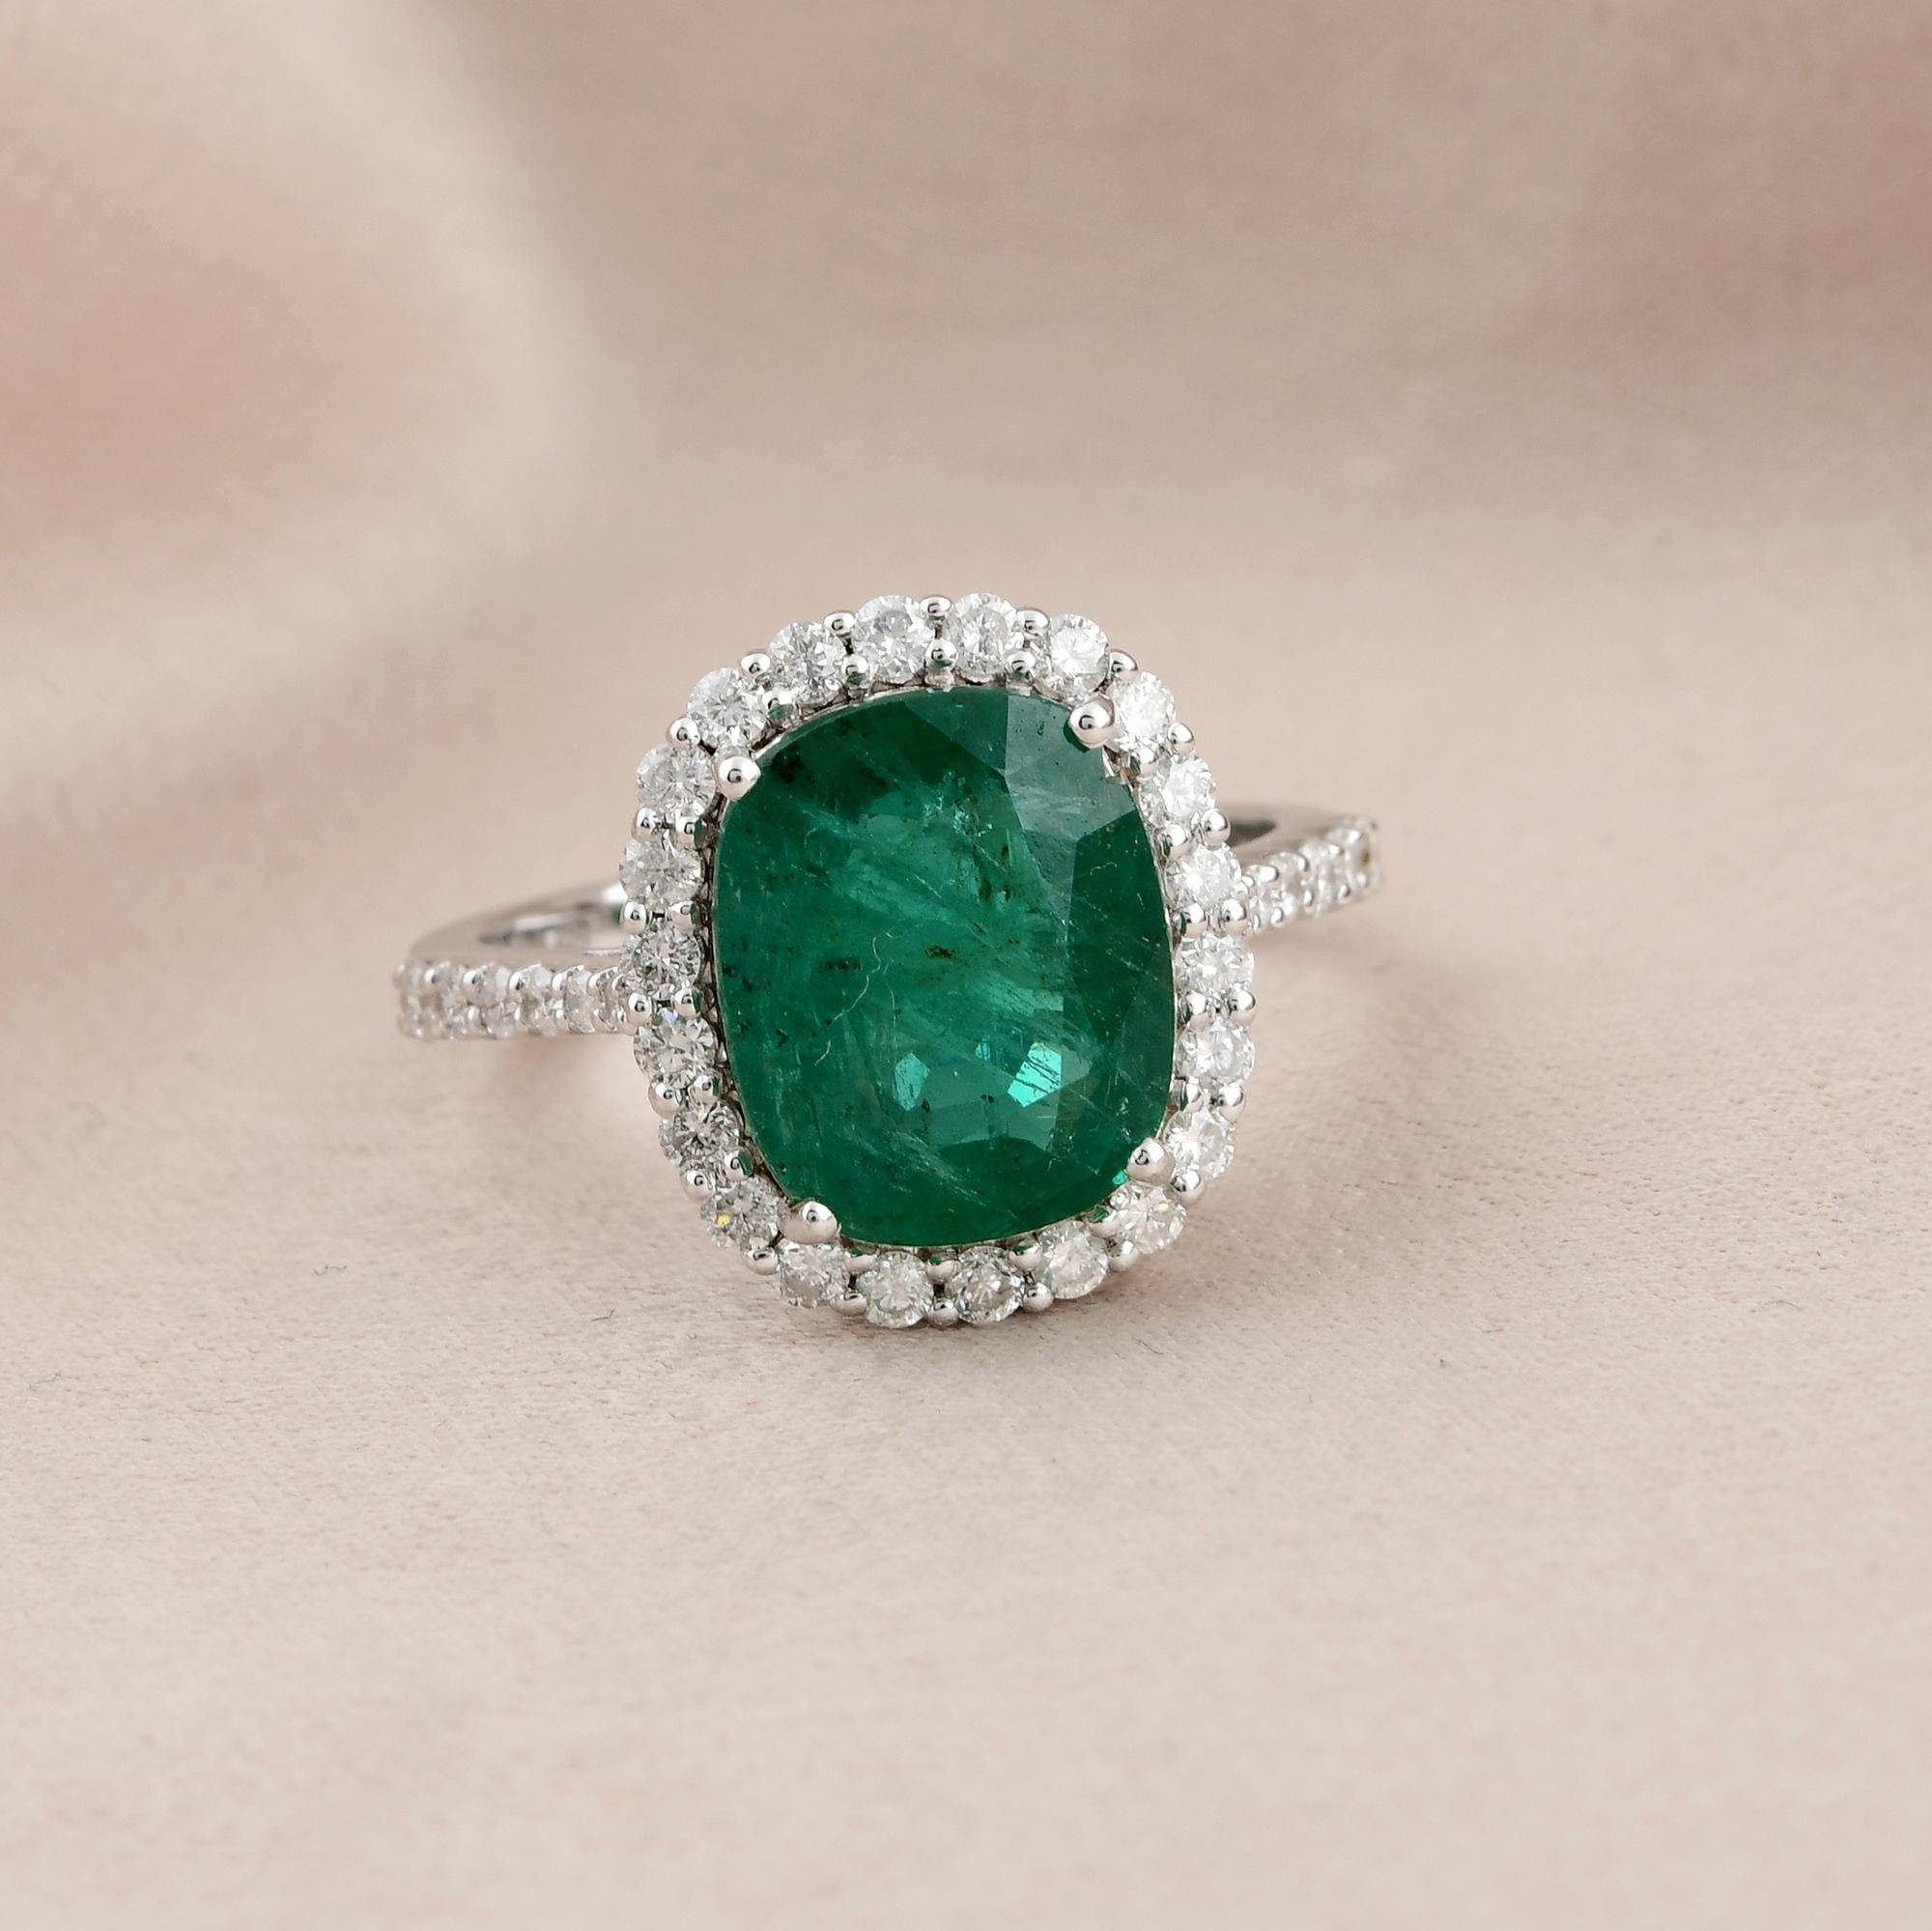 Oval Cut Zambian Emerald Gemstone Cocktail Ring Diamond 14 Kt White Gold Handmade Jewelry For Sale